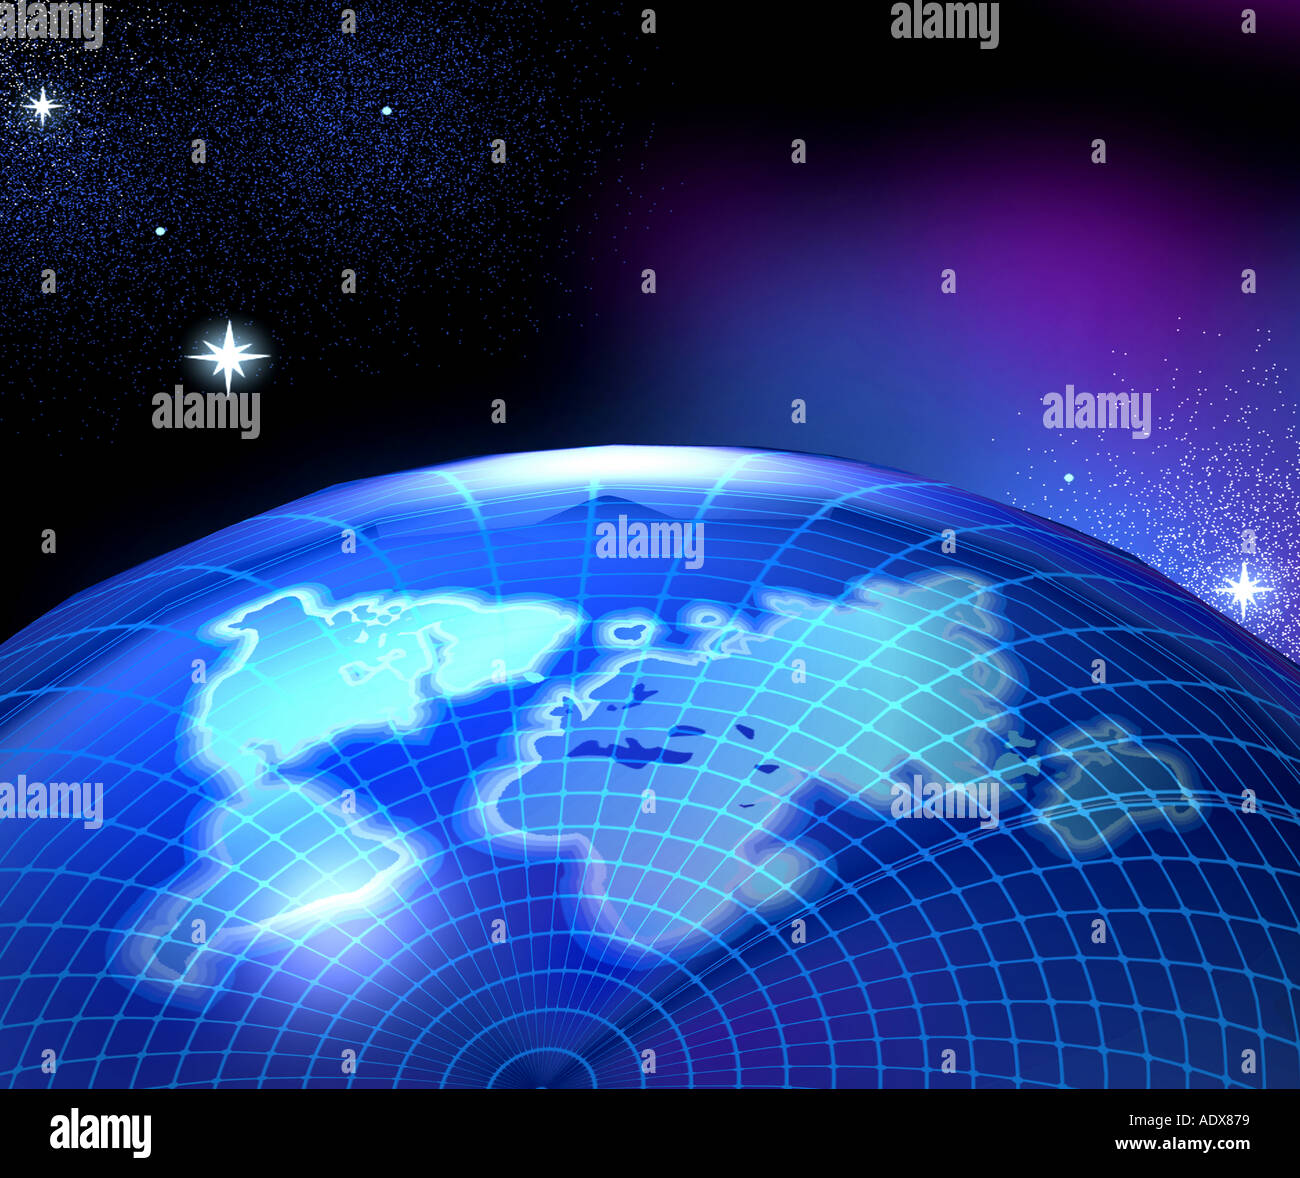 Illustrations virtual image rendered planet continents meridians stars abstract earth seen from the space map globe Stock Photo